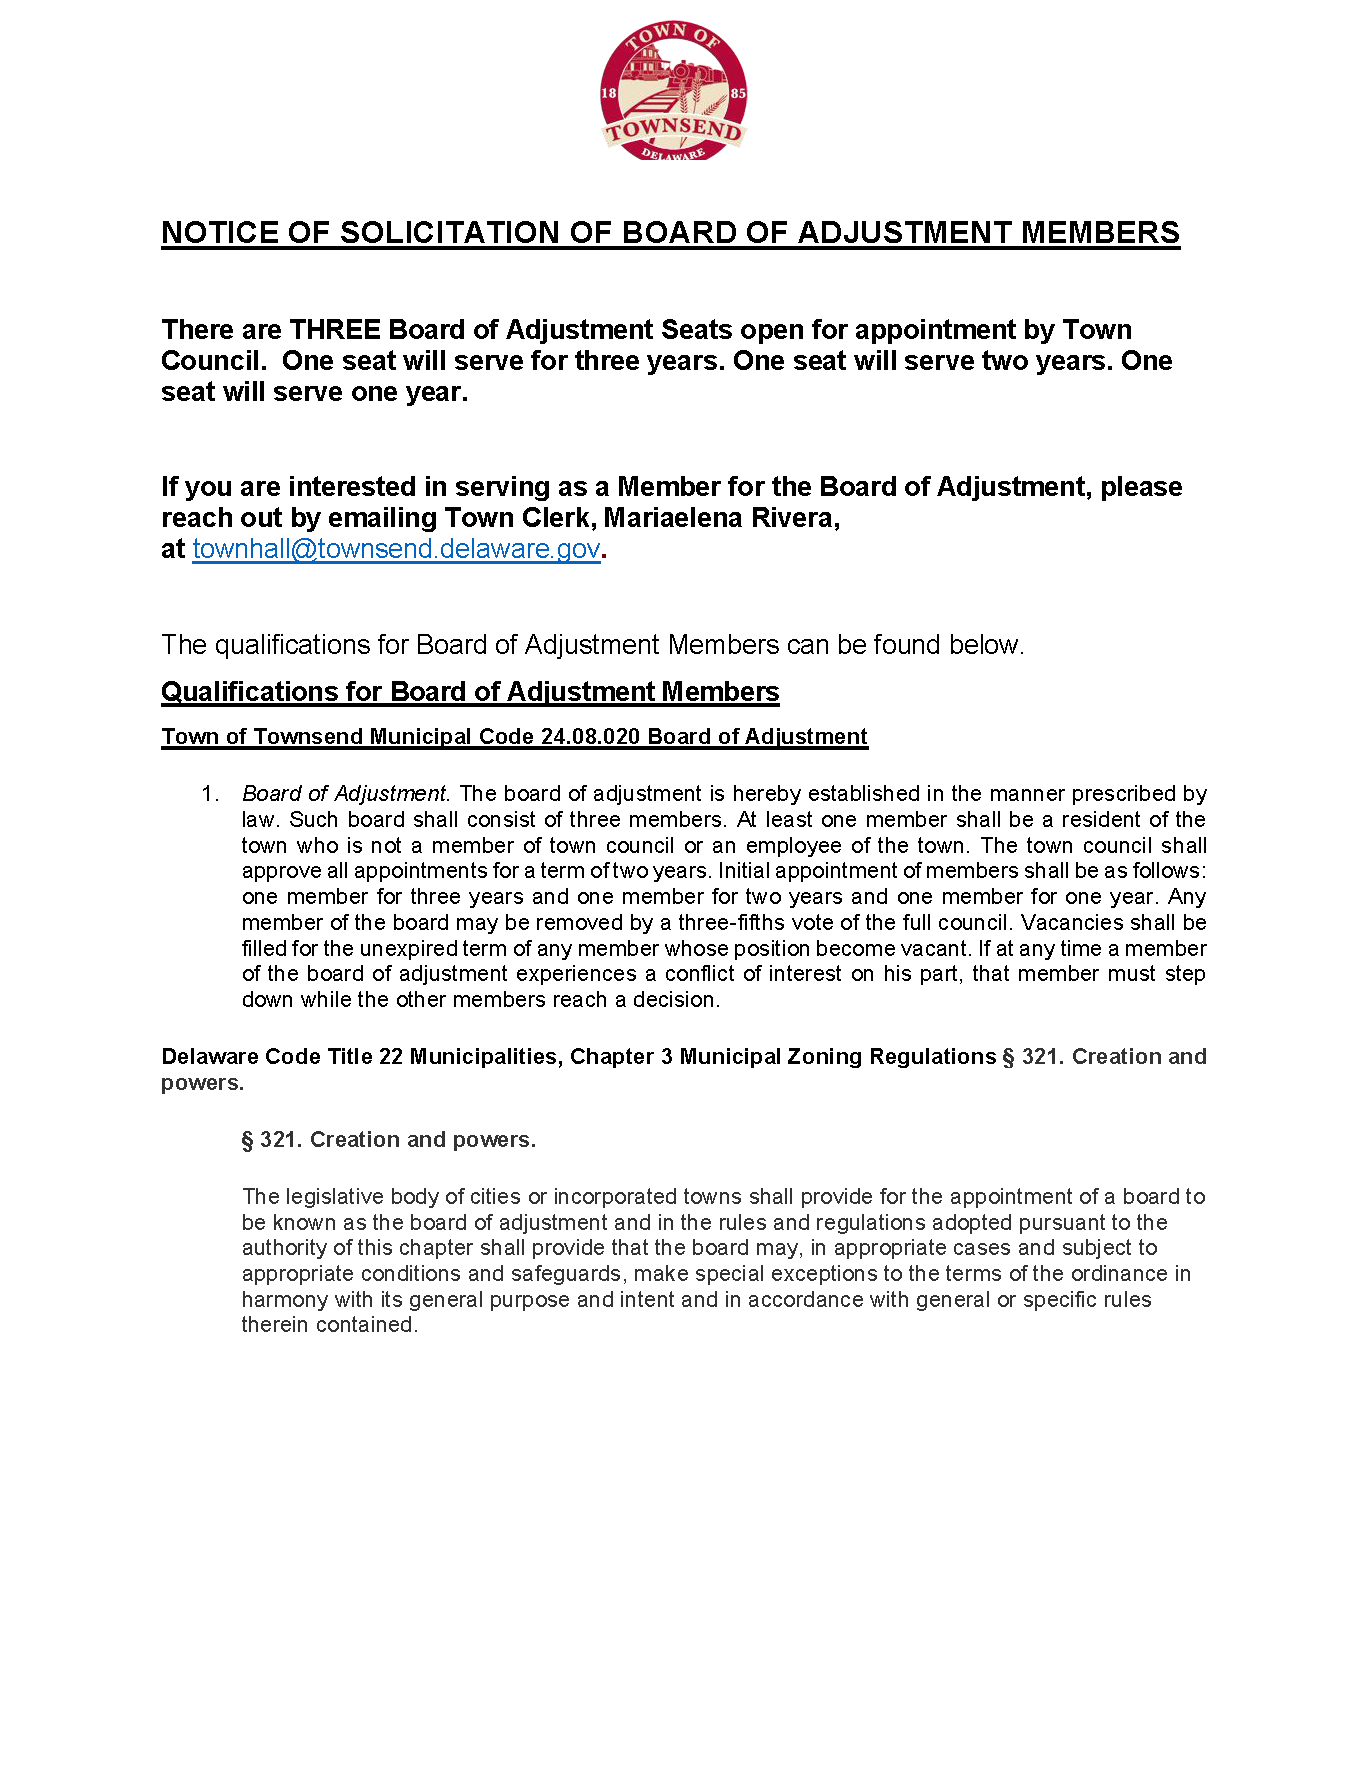 Solicitation for Board of Adjustment Members